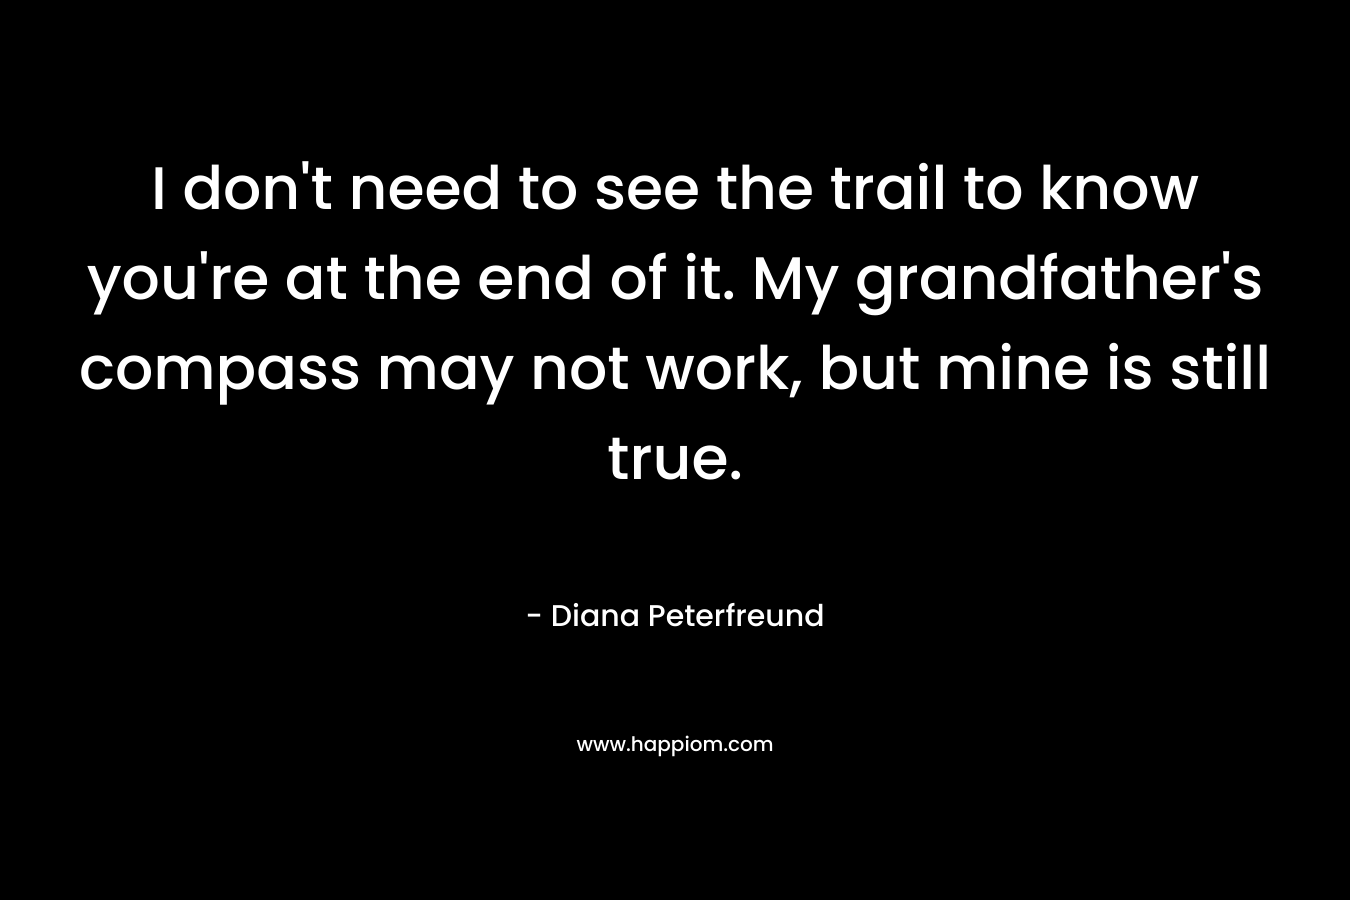 I don’t need to see the trail to know you’re at the end of it. My grandfather’s compass may not work, but mine is still true. – Diana Peterfreund